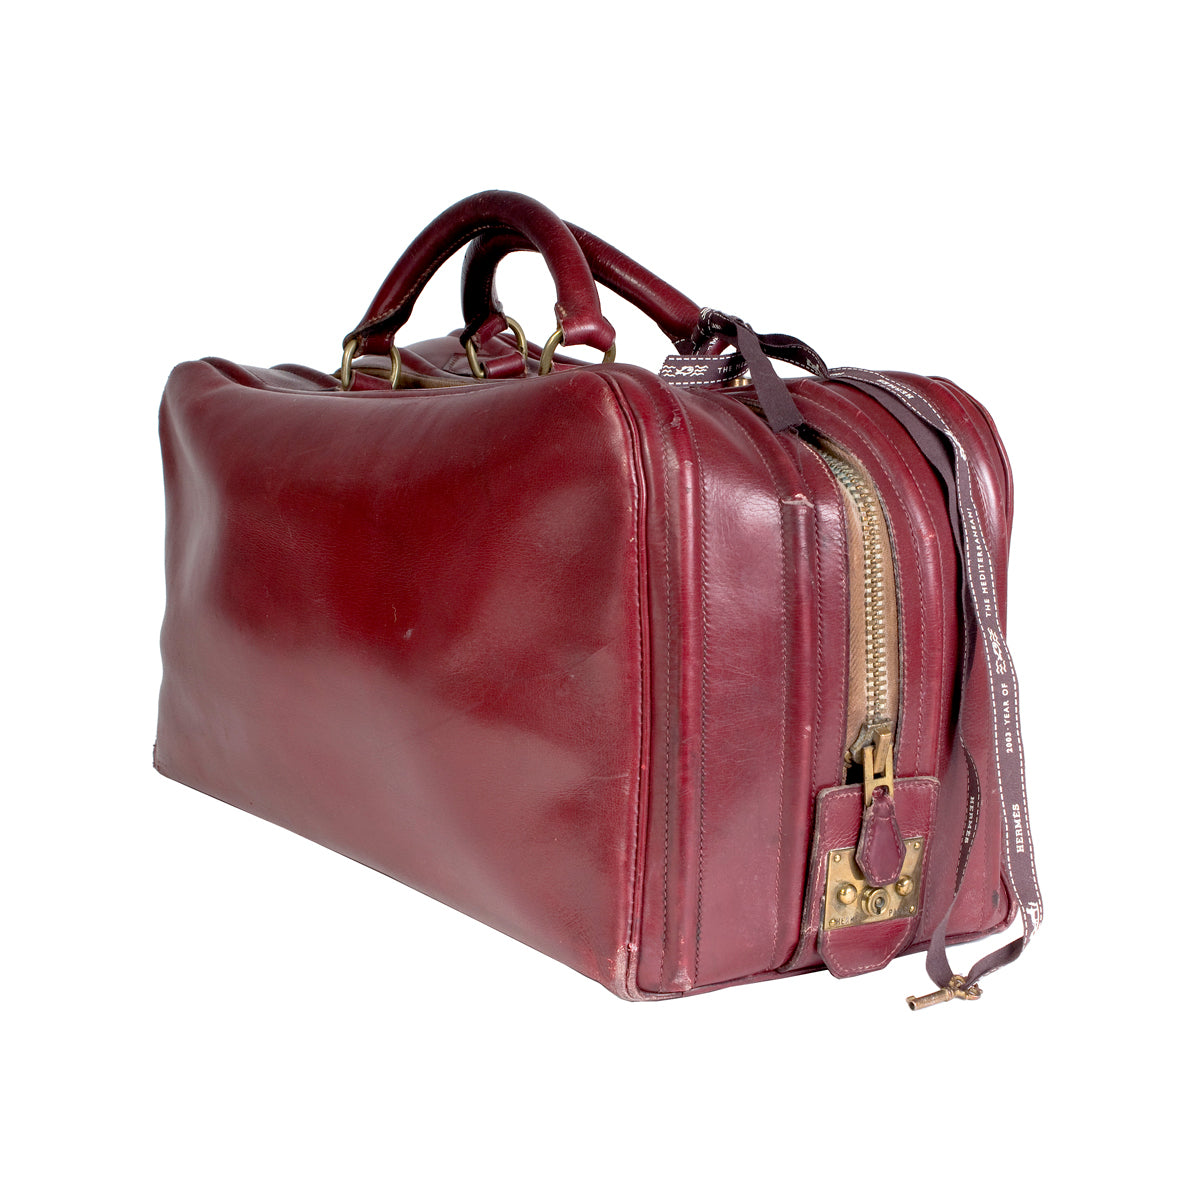 Guy Laroche Leather Holdall  Leather holdall, Holdall, Holdall bag